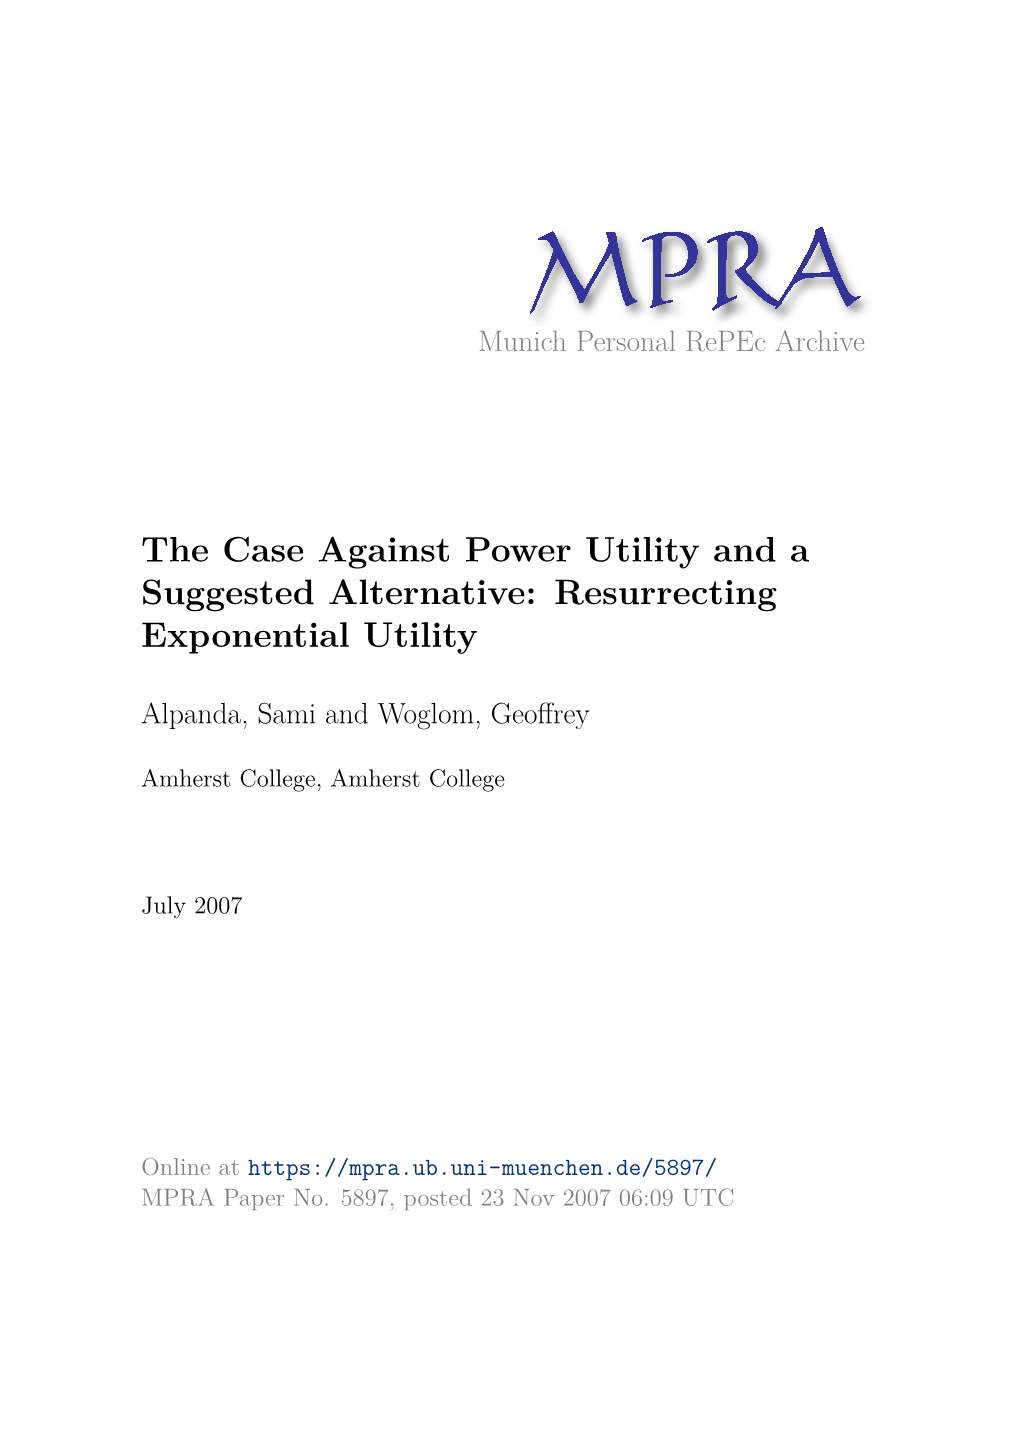 The Case Against Power Utility and a Suggested Alternative: Resurrecting Exponential Utility